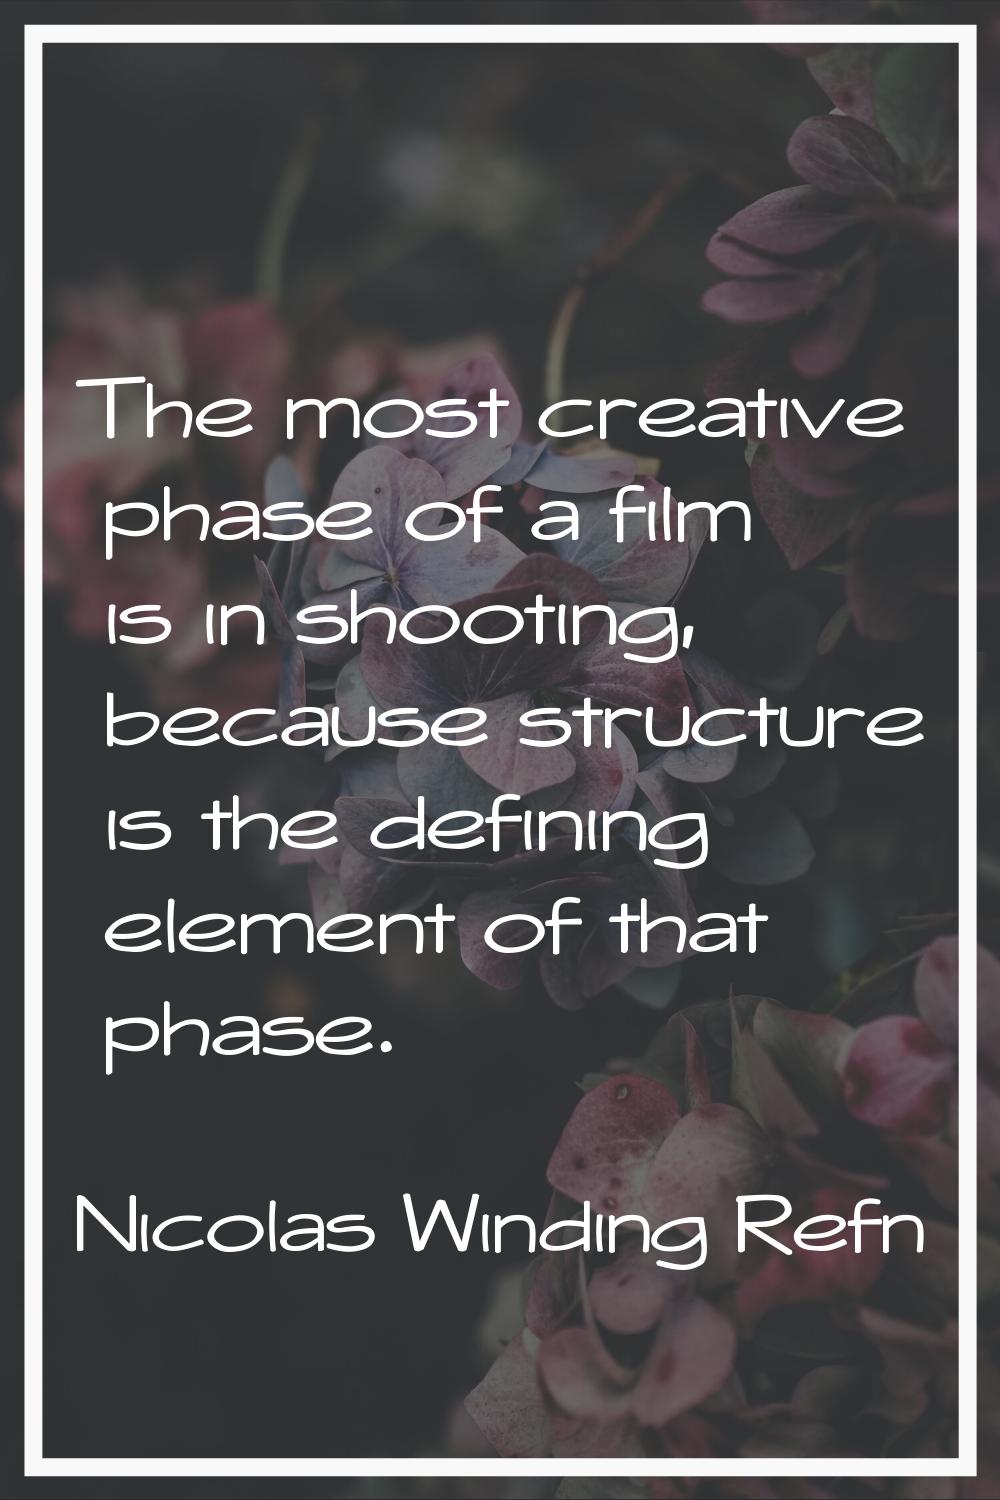 The most creative phase of a film is in shooting, because structure is the defining element of that